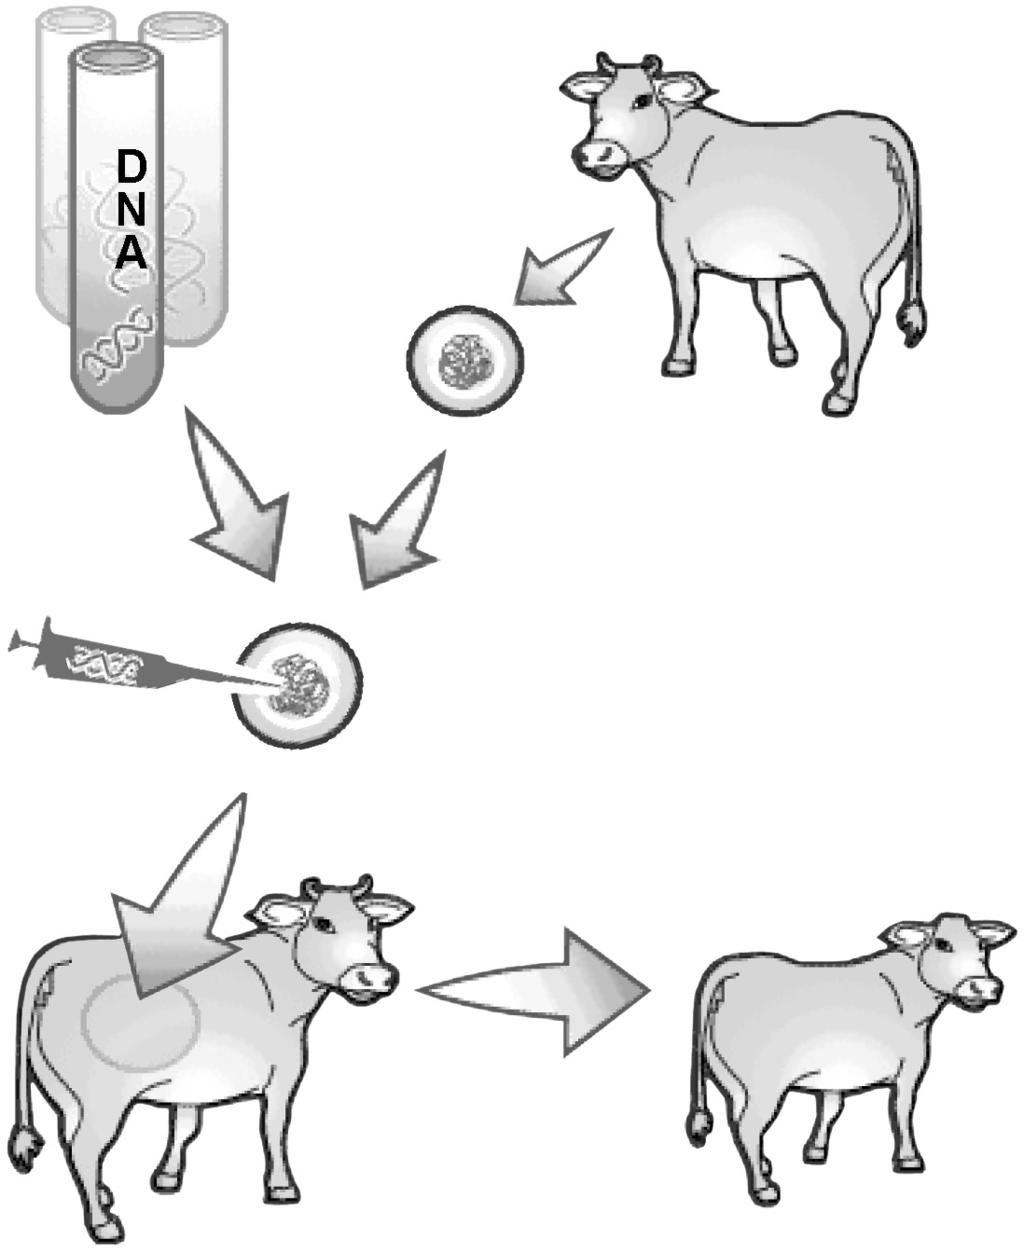 new method of farming This is a method used for the production of designer milk containing human antibodies.